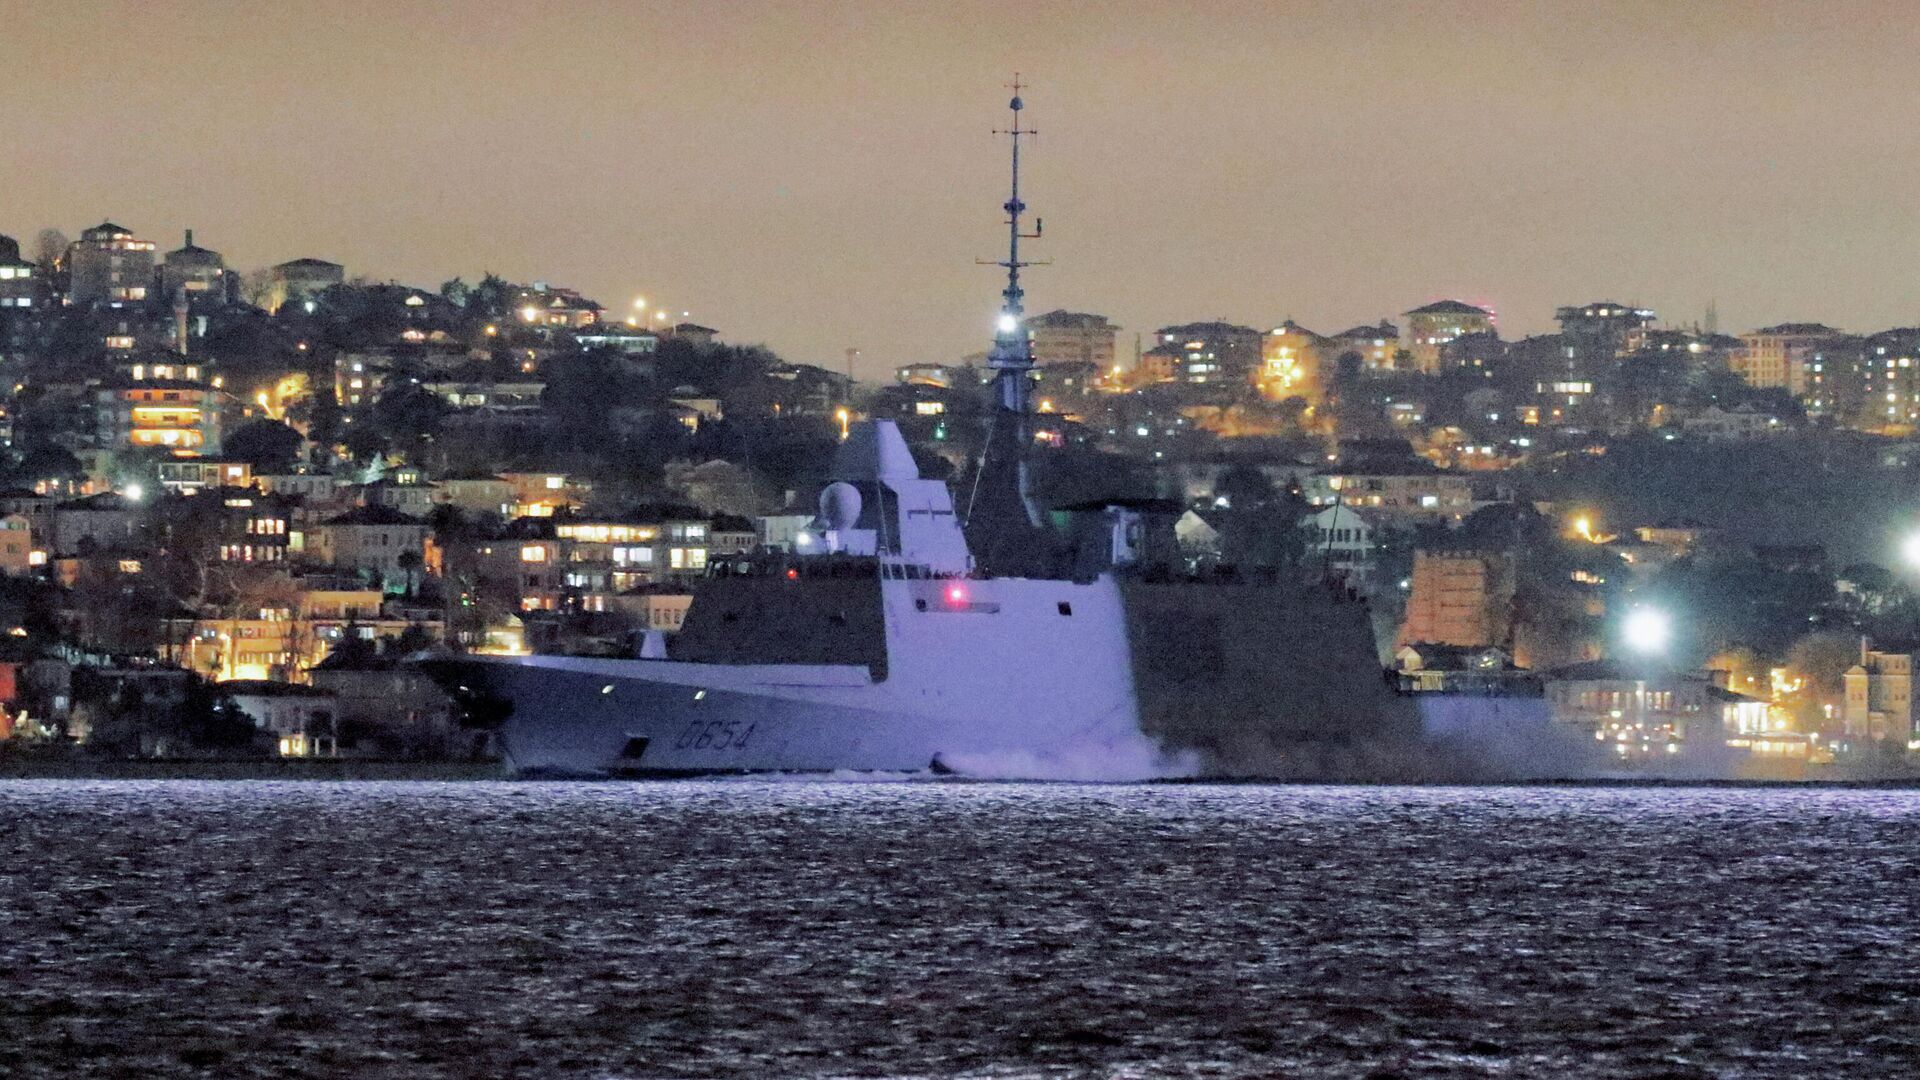 French Navy's frigate Auvergne sails in the Bosphorus as it is on its way to the Black Sea in Istanbul, Turkey, December 13, 2021 - Sputnik International, 1920, 24.12.2021